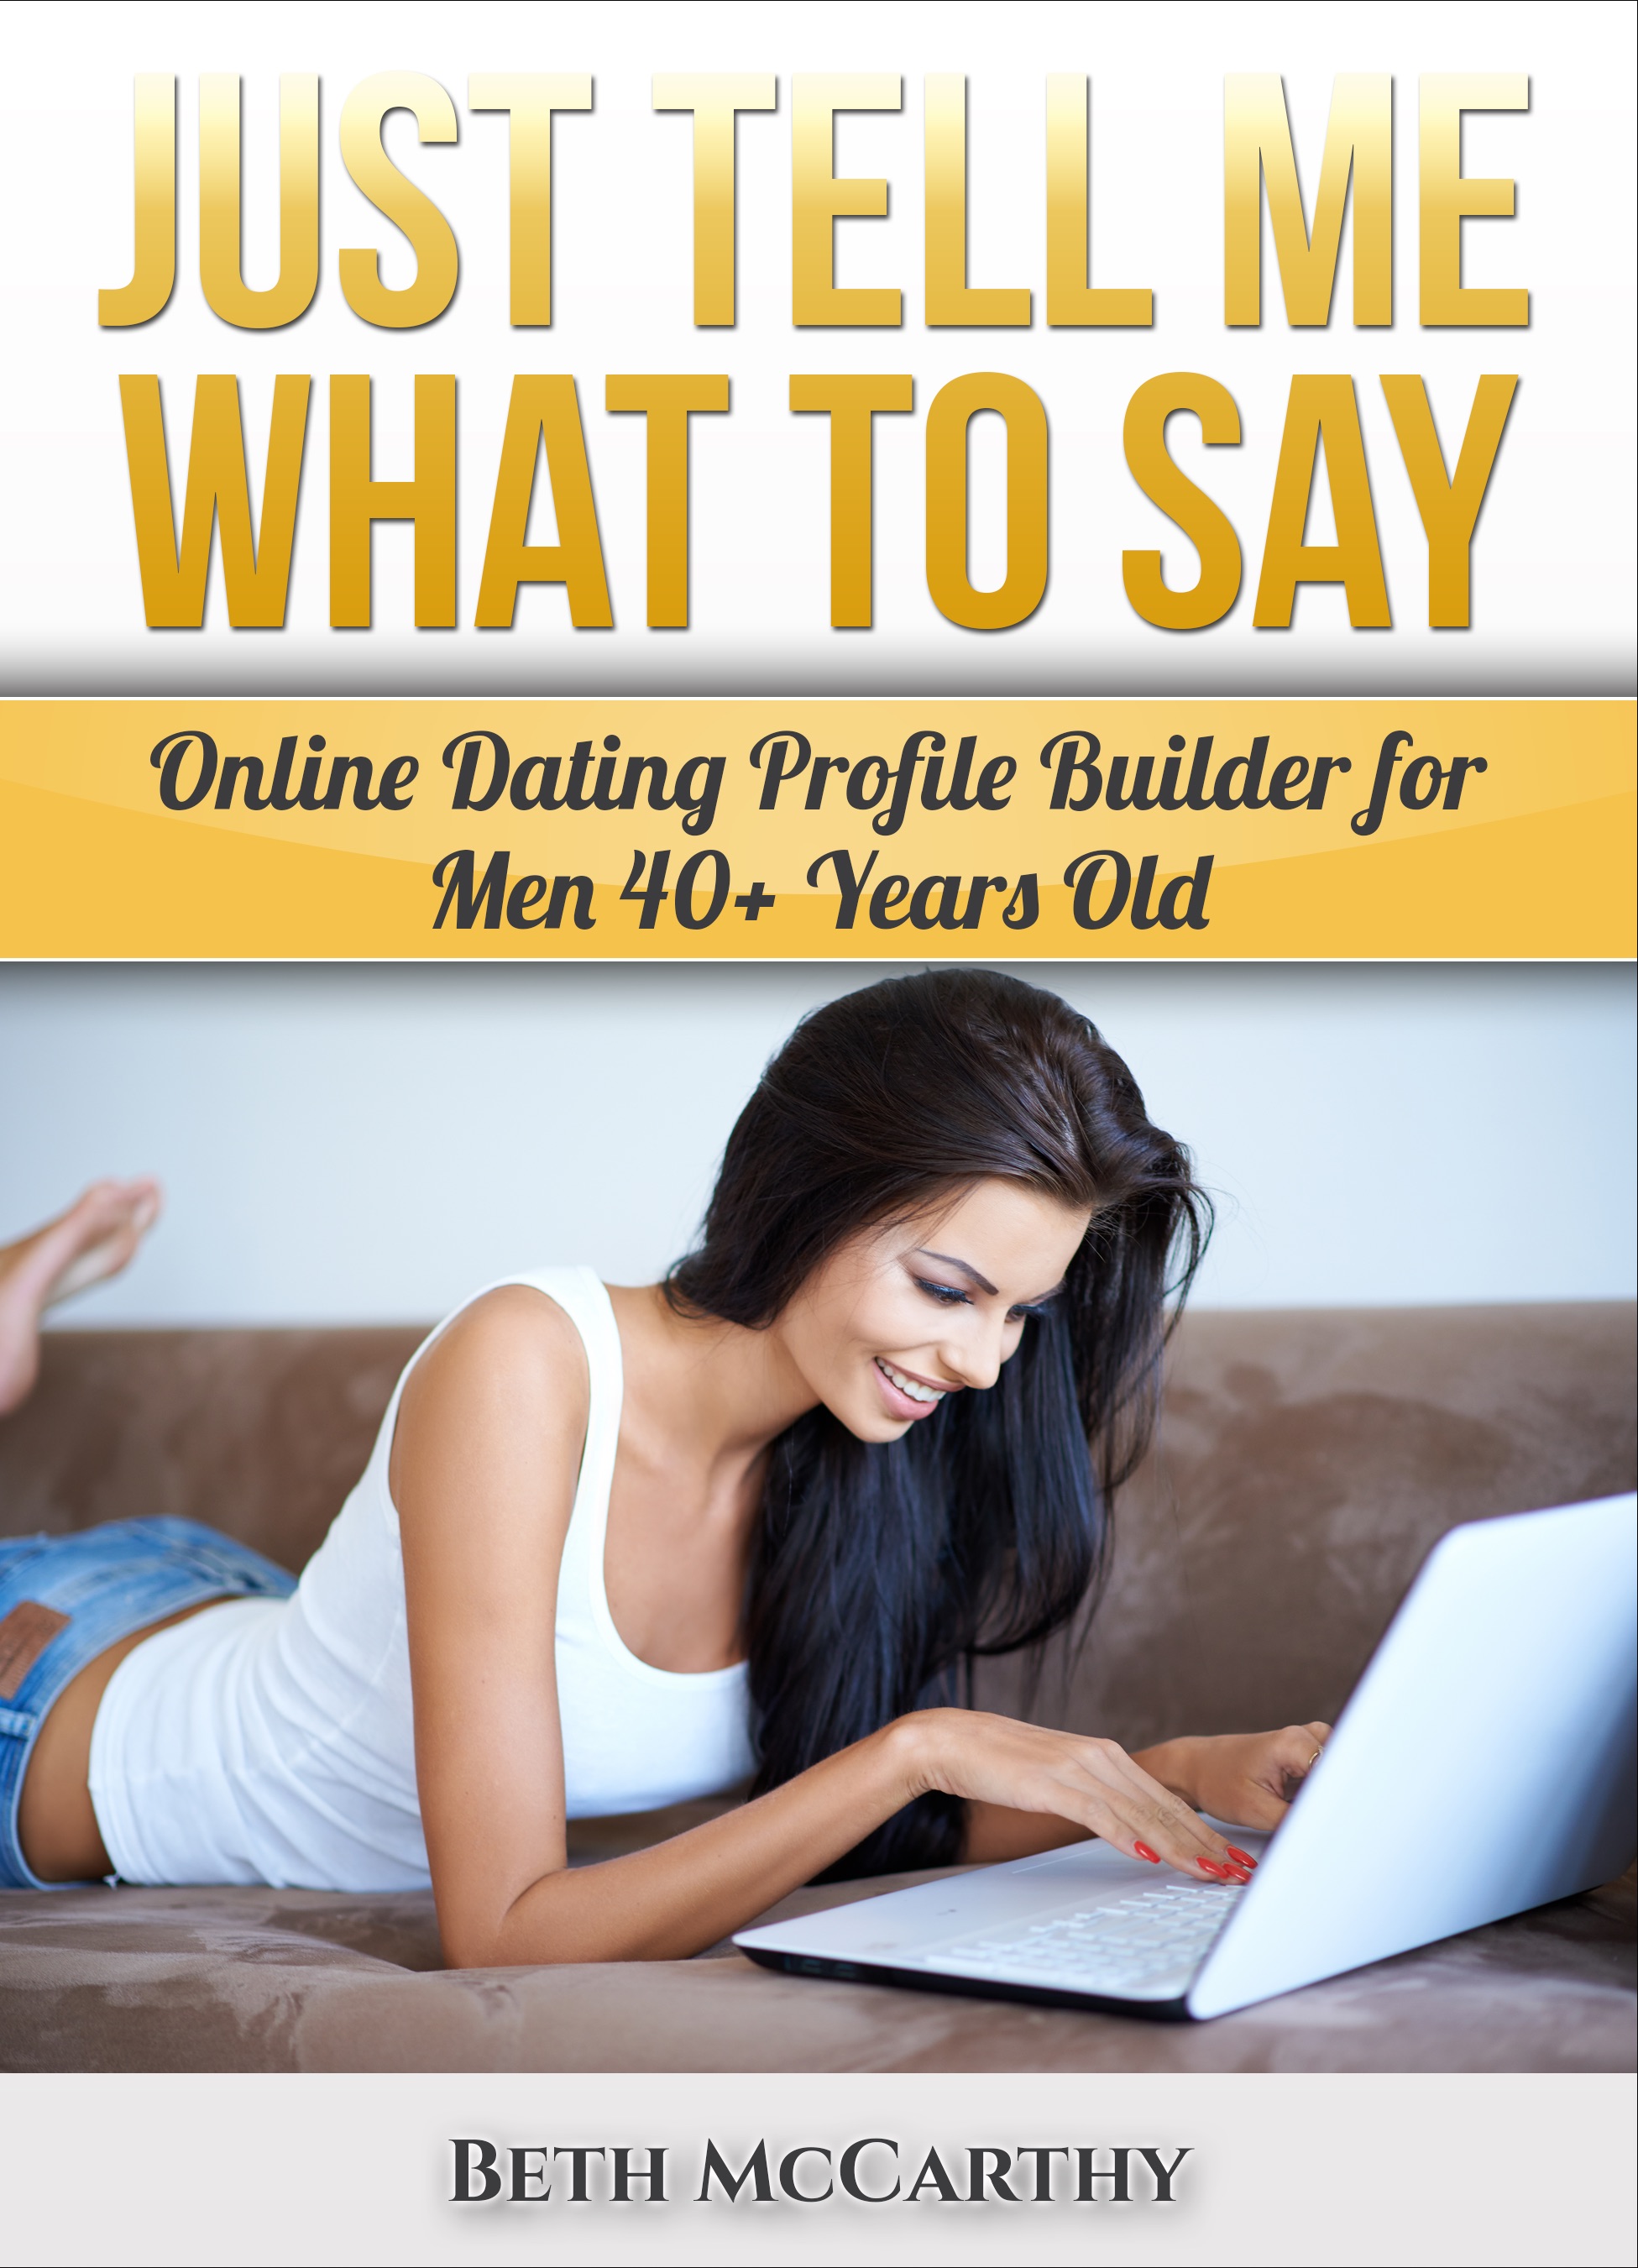 What to say in an email to a guy online dating